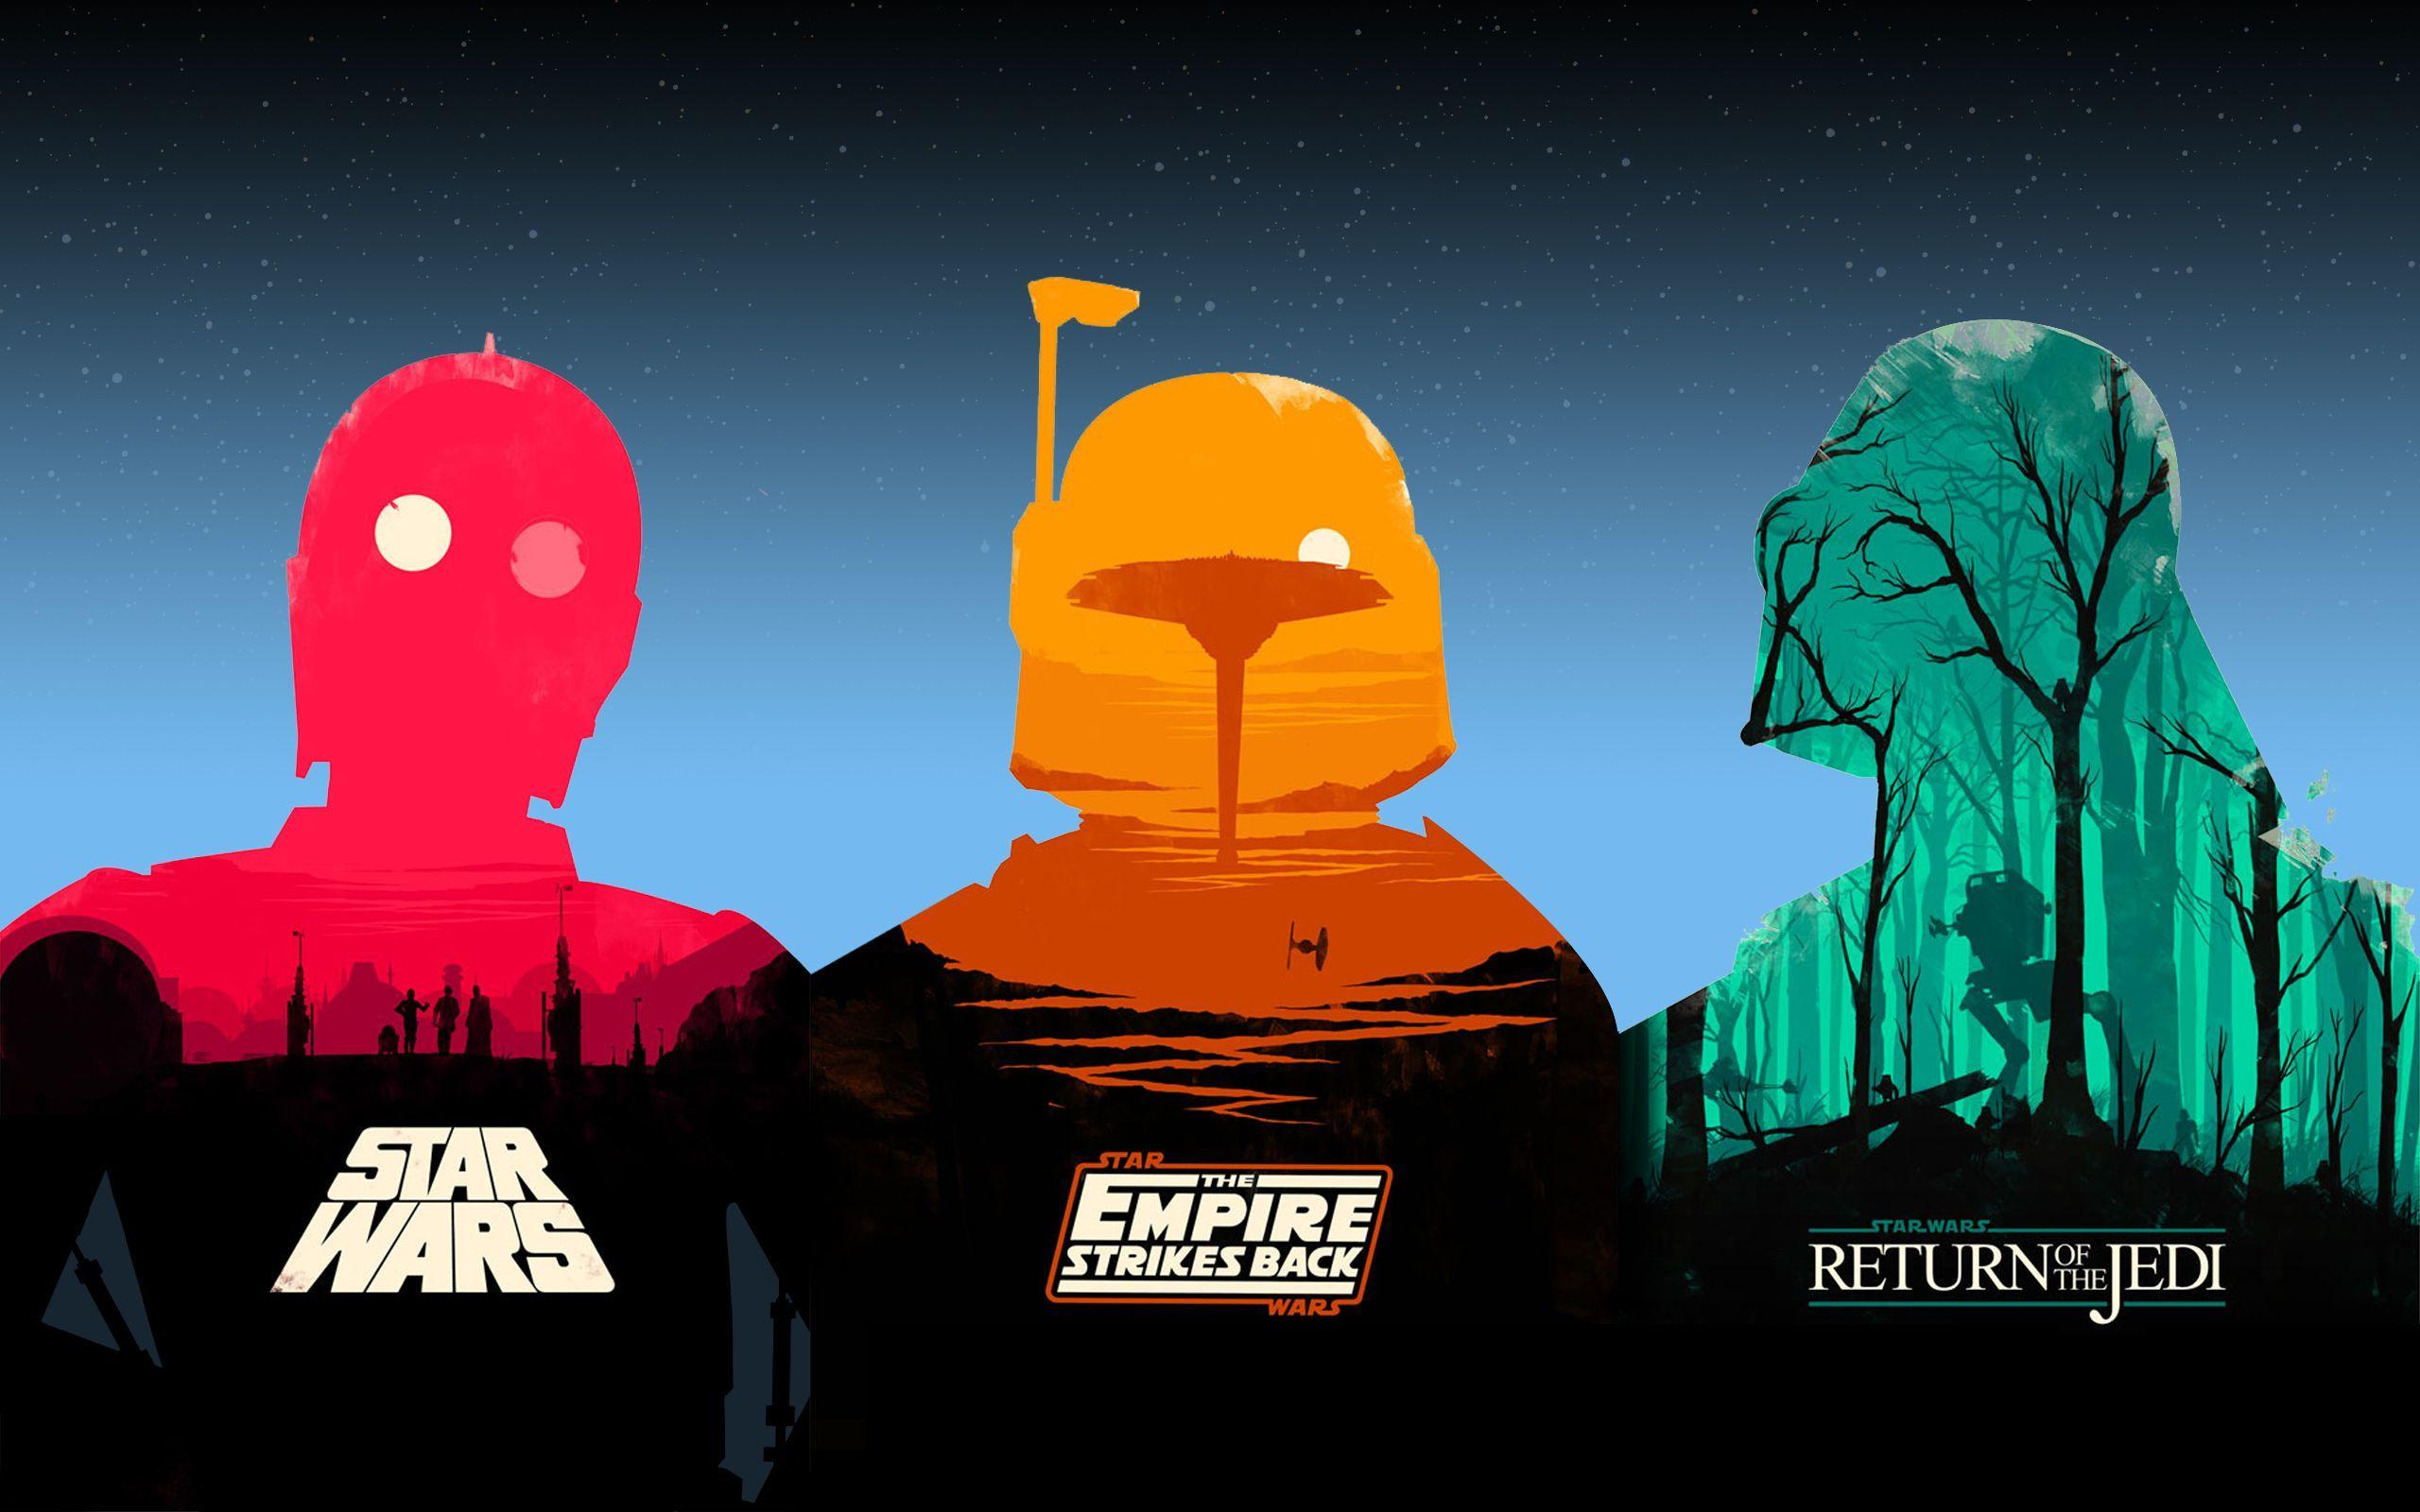 Epic Star Wars Logo - I've compiled Olly Moss' Star Wars posters into one epic wallpaper ...